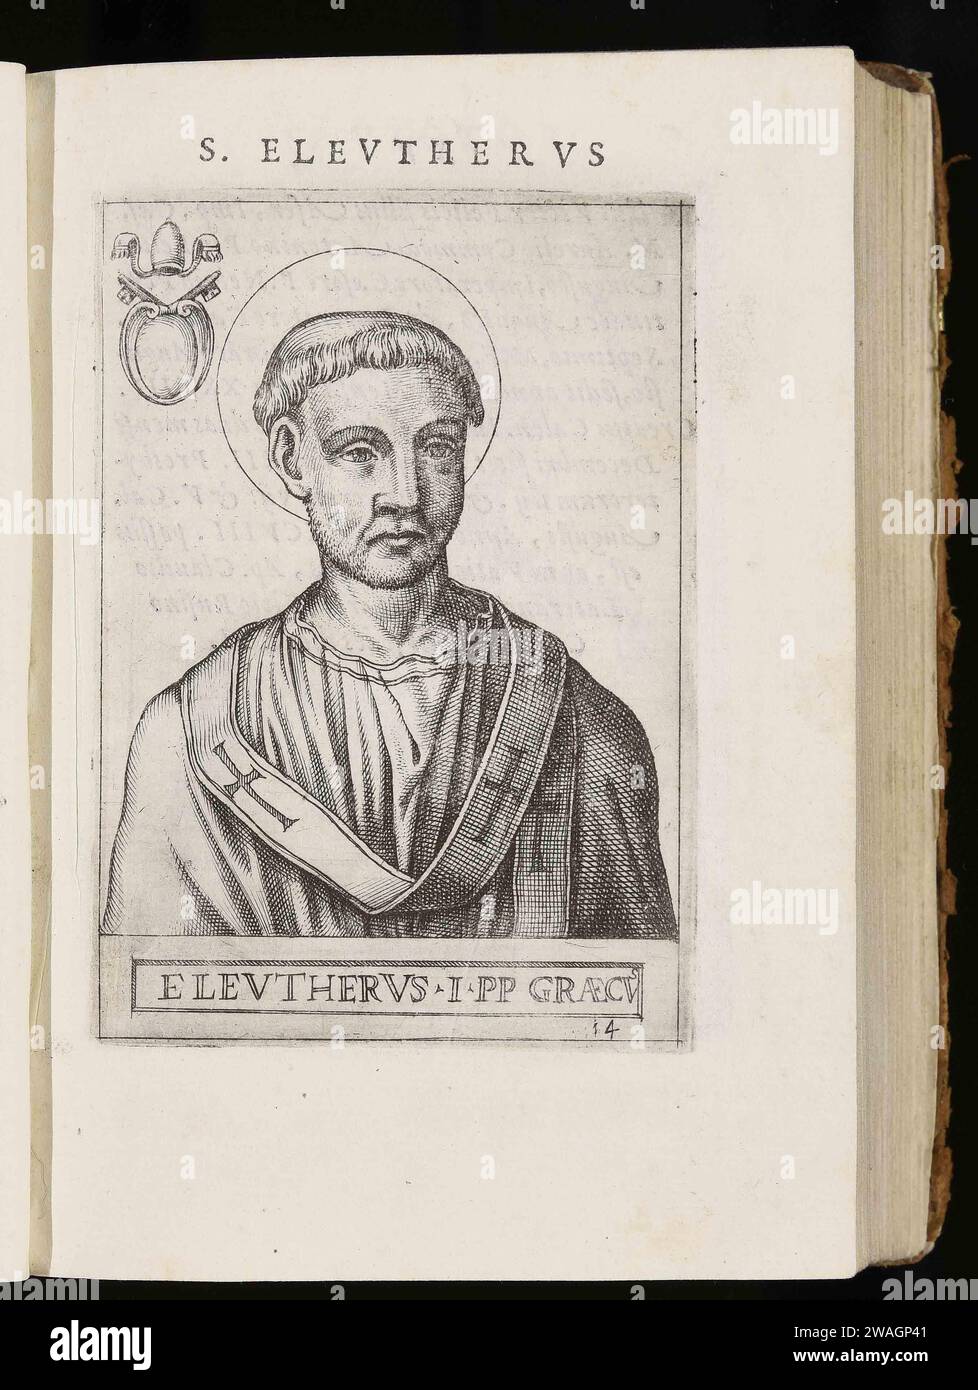 A 1580 illustration of Pope Eleutherius, who was pontiff from AD174 to AD189. He was the thirteenth pope. Stock Photo